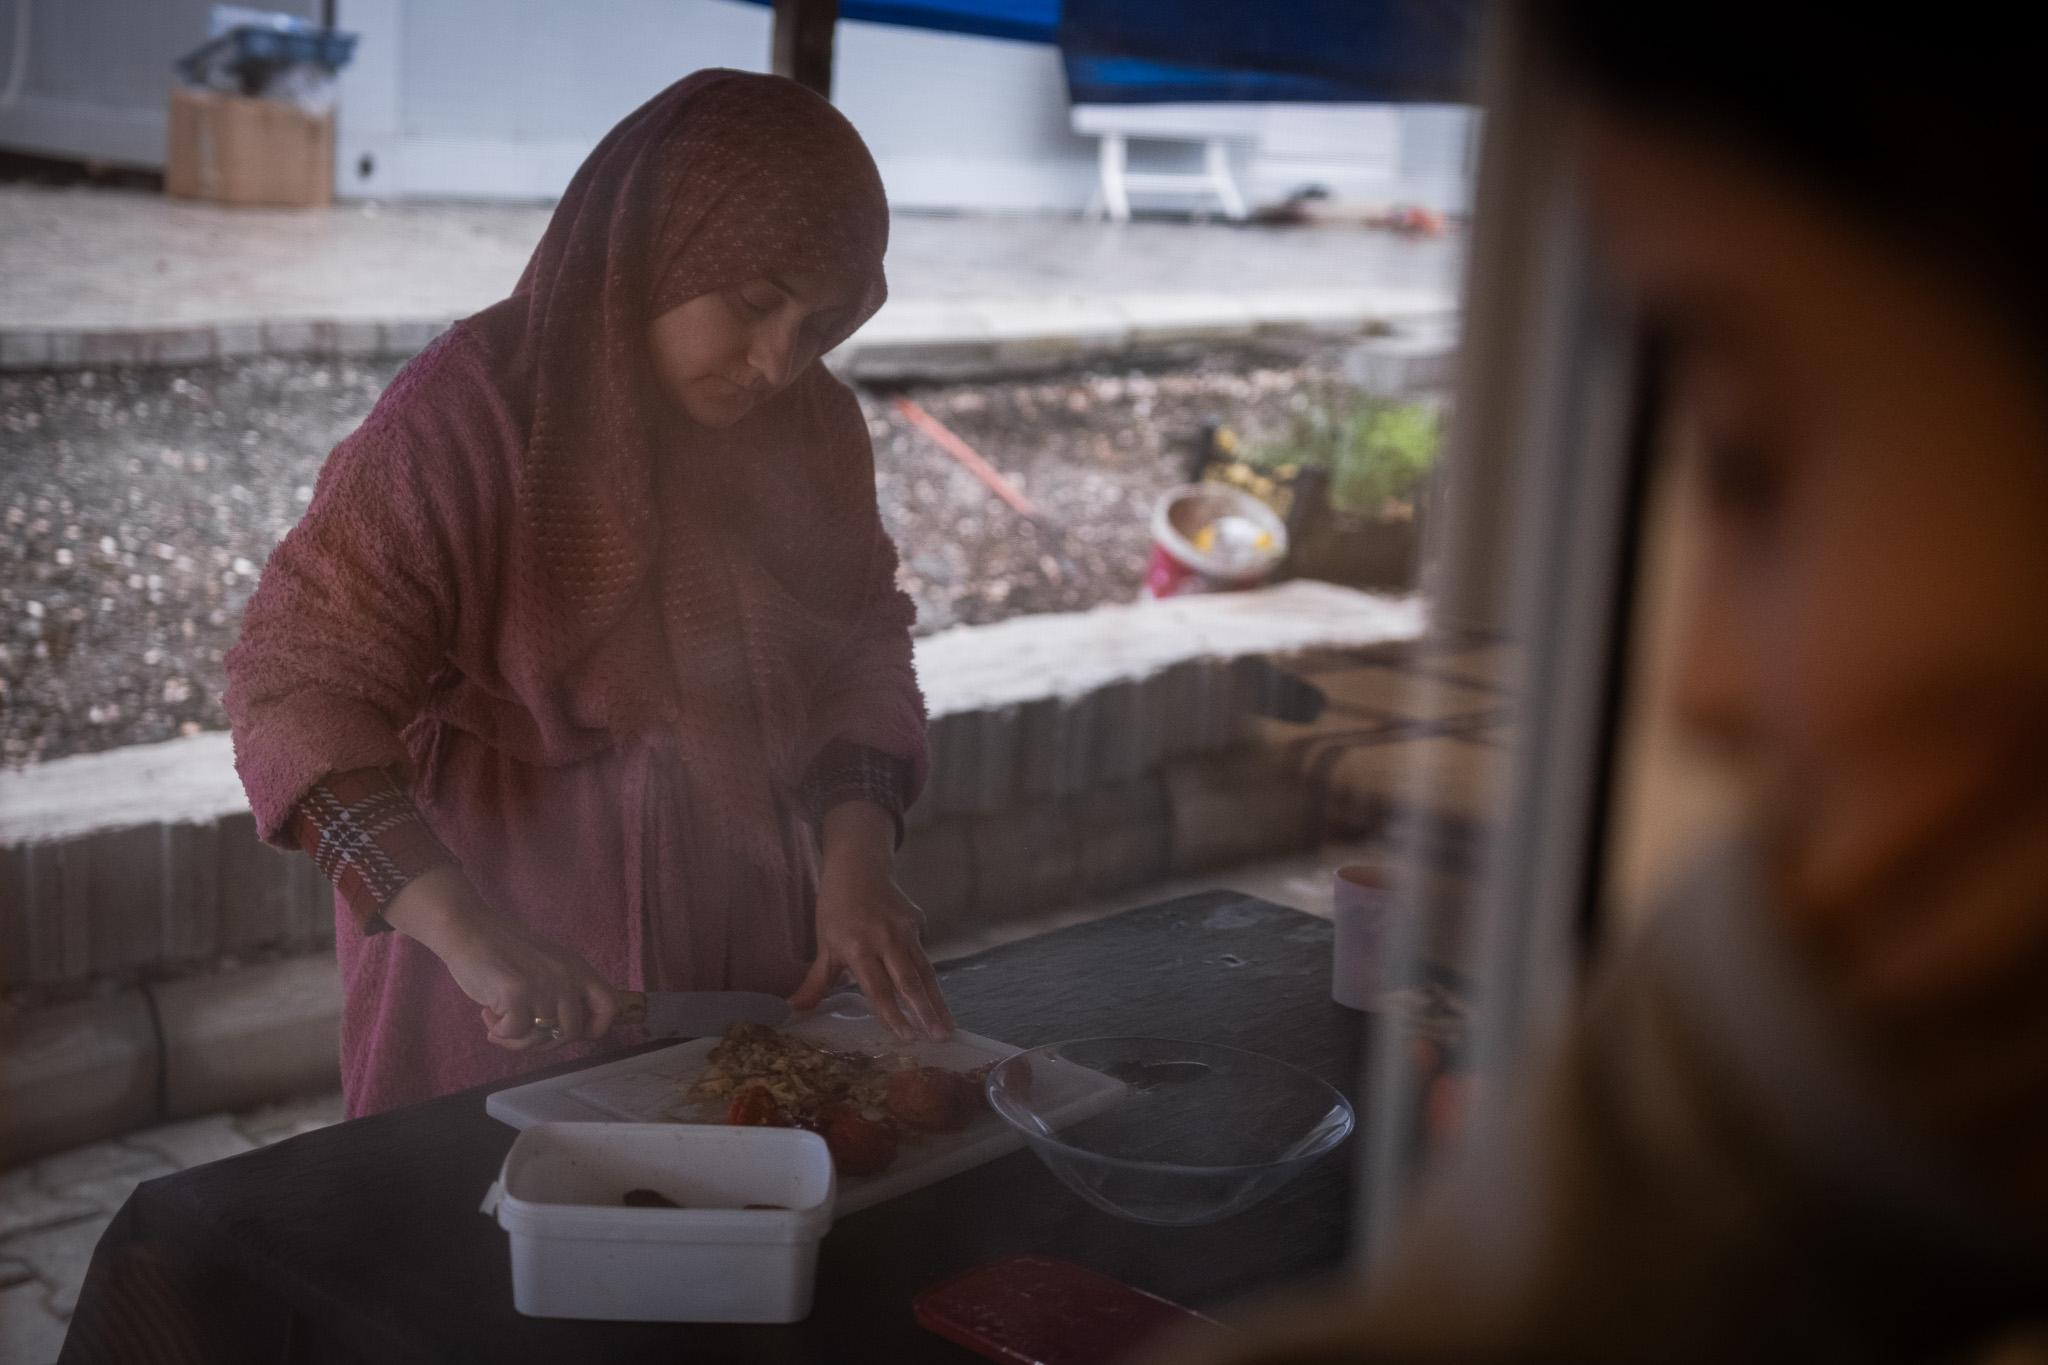 One year on, the ancient city of Antakya struggles to show its first signs of life -  Sevcan daughter observes her mother cooking from inside their new container. Despite containers...